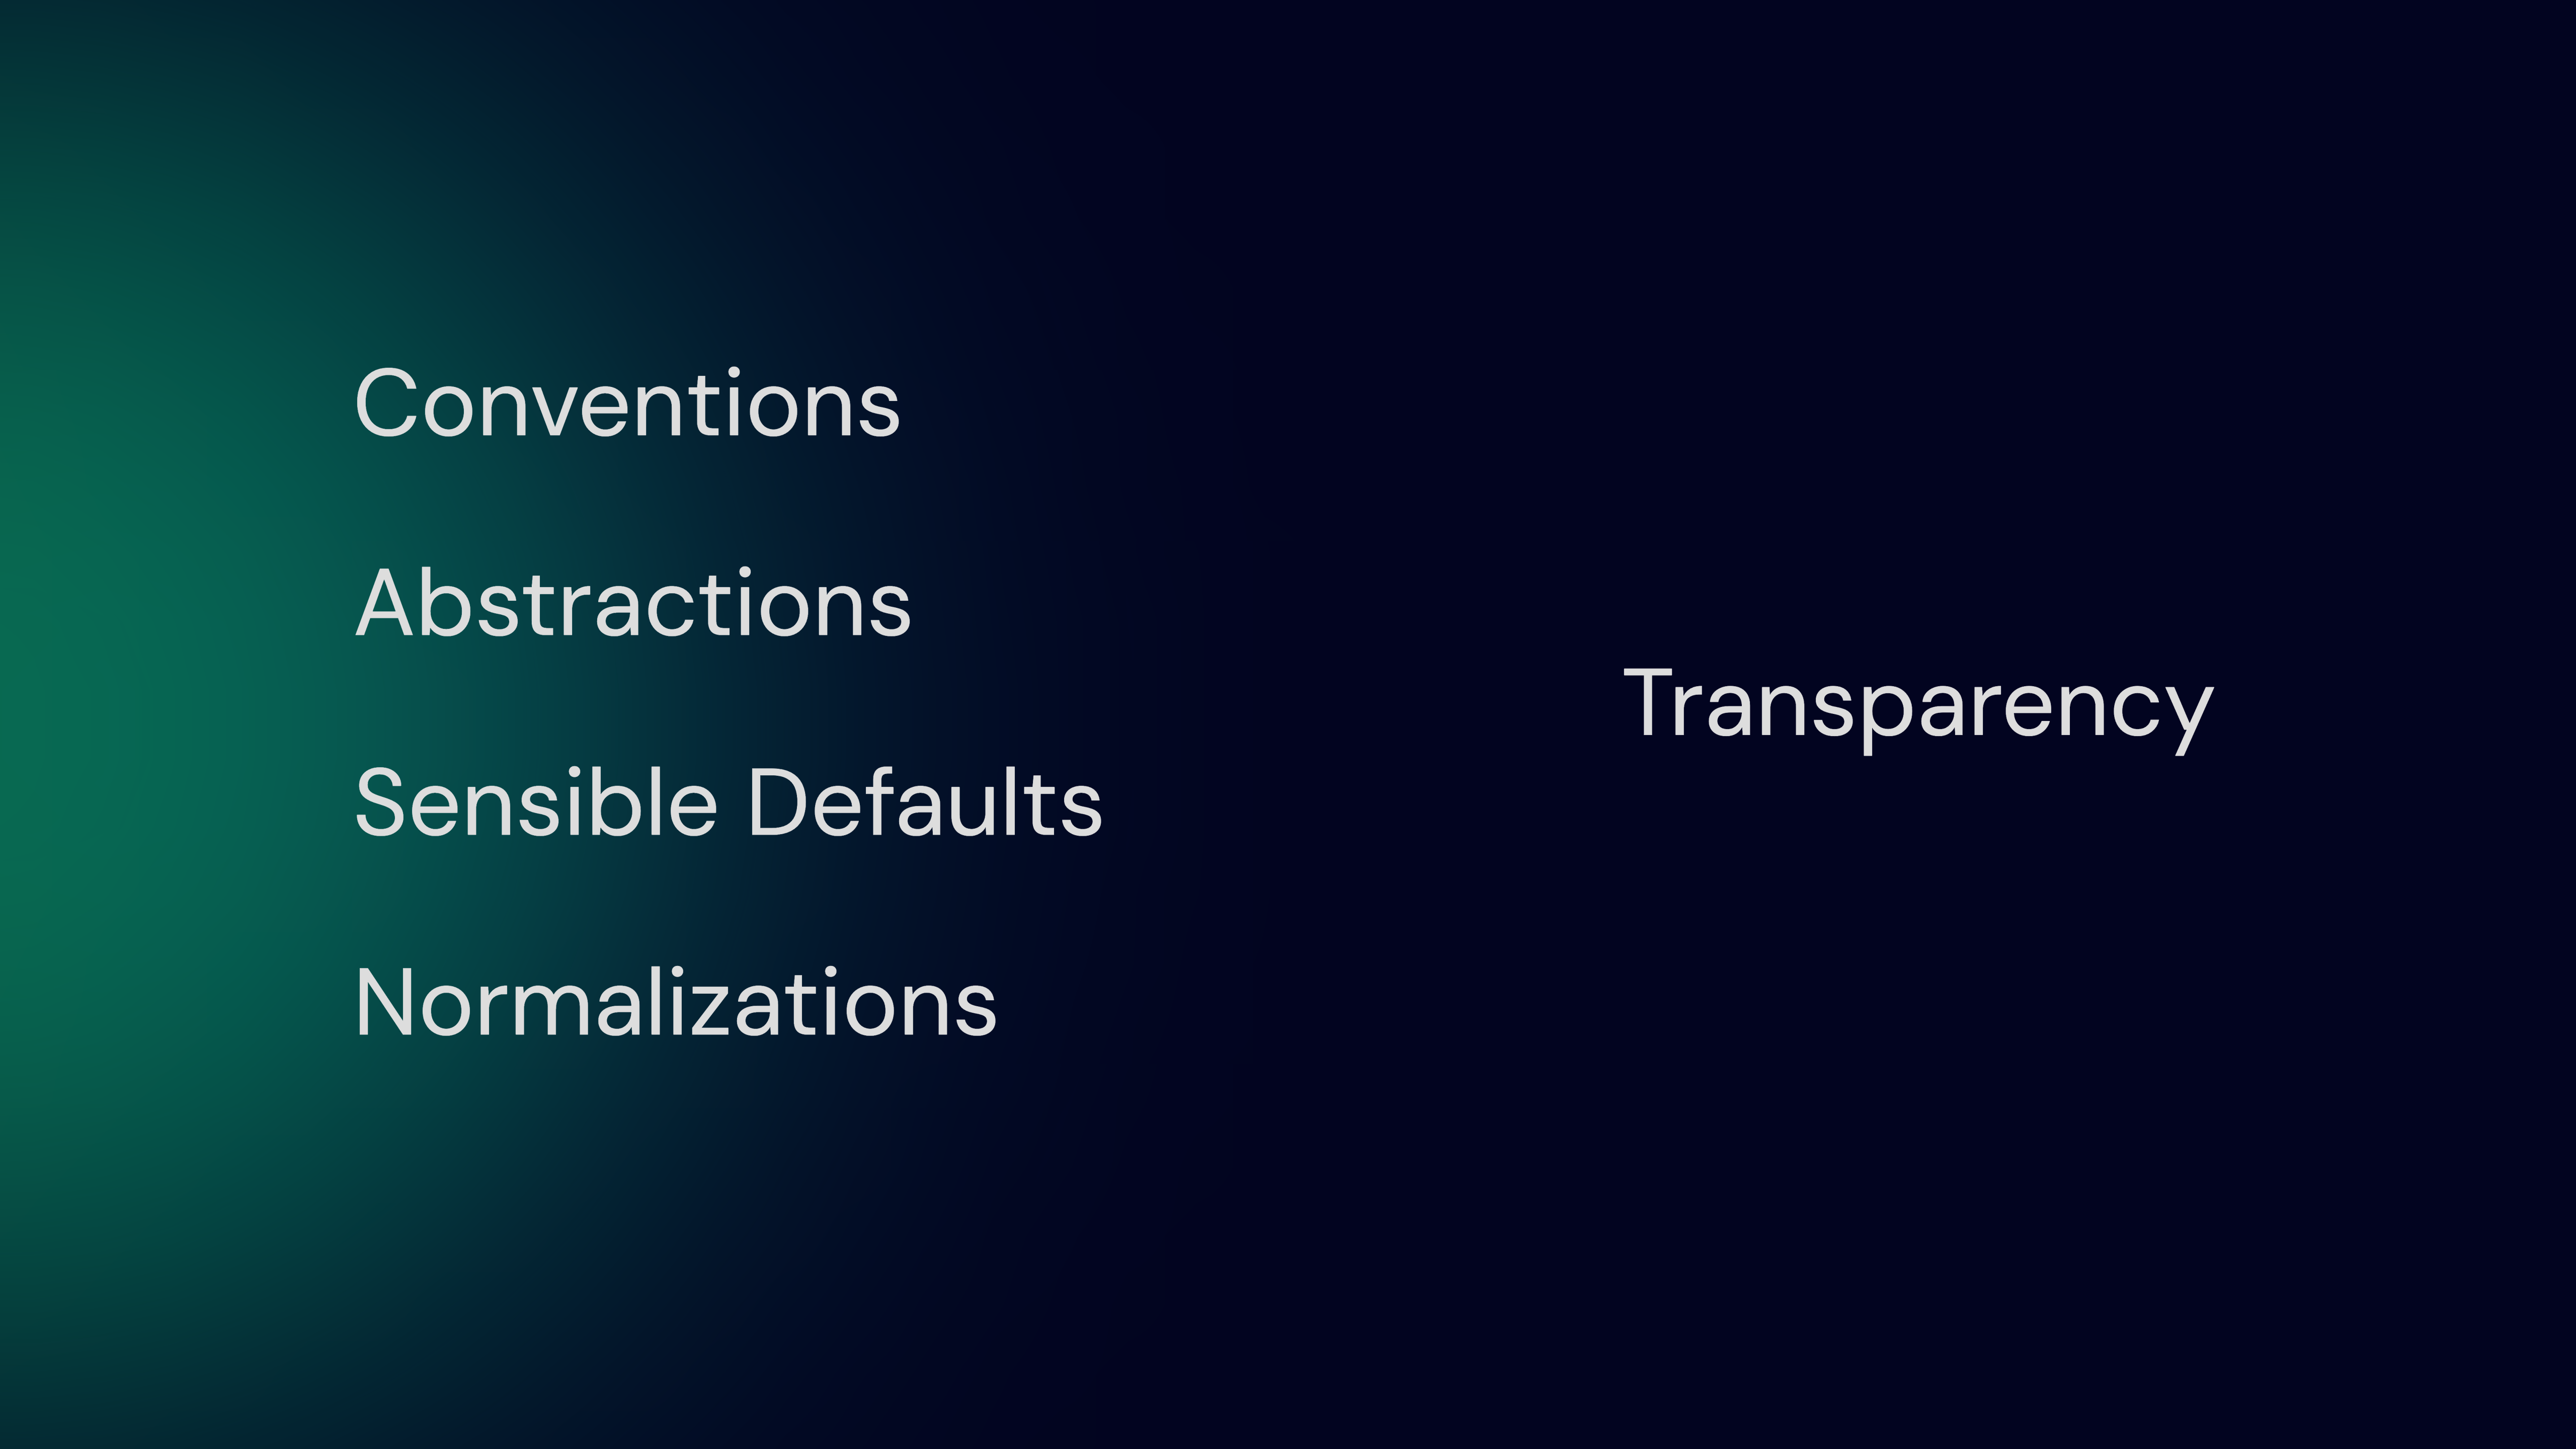 "Transparency" as the trade offs of having "Conventions", "Abstractions", "Sensible Defaults" and "Normalizations"